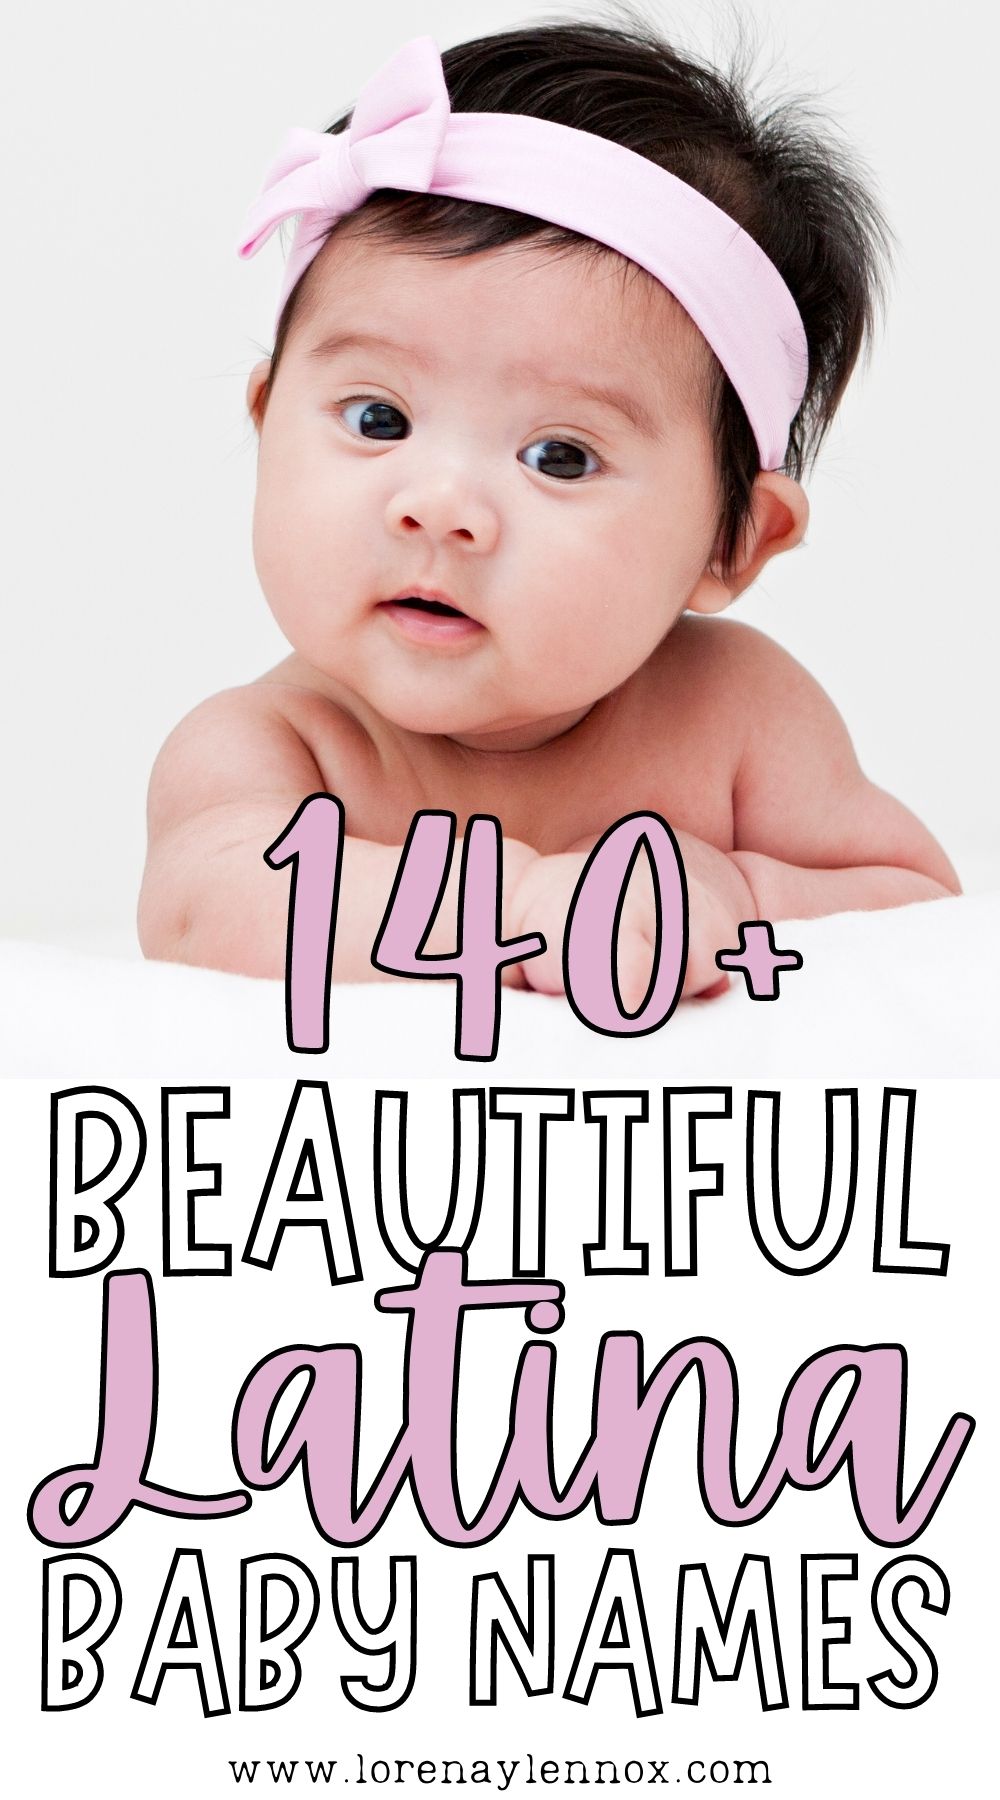 Choosing a baby name can be so very exciting yet daunting at the same time.

If you plan on choosing a Latina girl name to carry on your Hispanic heritage, the decision-making process can be even more stressful!

Therefore, I hope to ease your baby name selection with this collection of 140+ Beautiful Latina girl names.